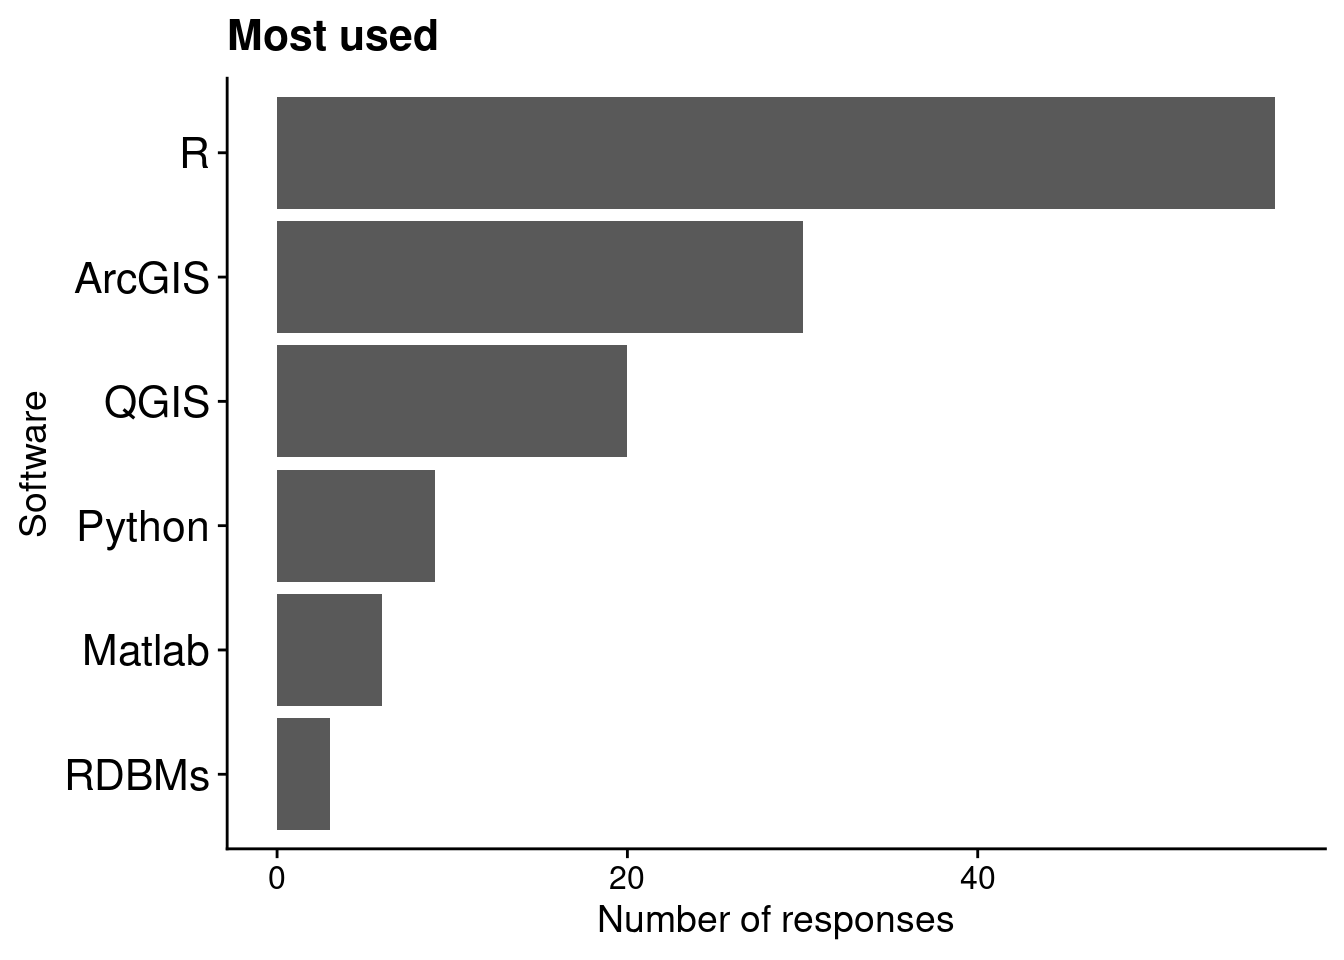 Horizontal bar plots indicating participants' votes on which software are the most used. In decreasing order of votes: R, ArcGIS, QGIS, Python, Matlab, RDBMs.